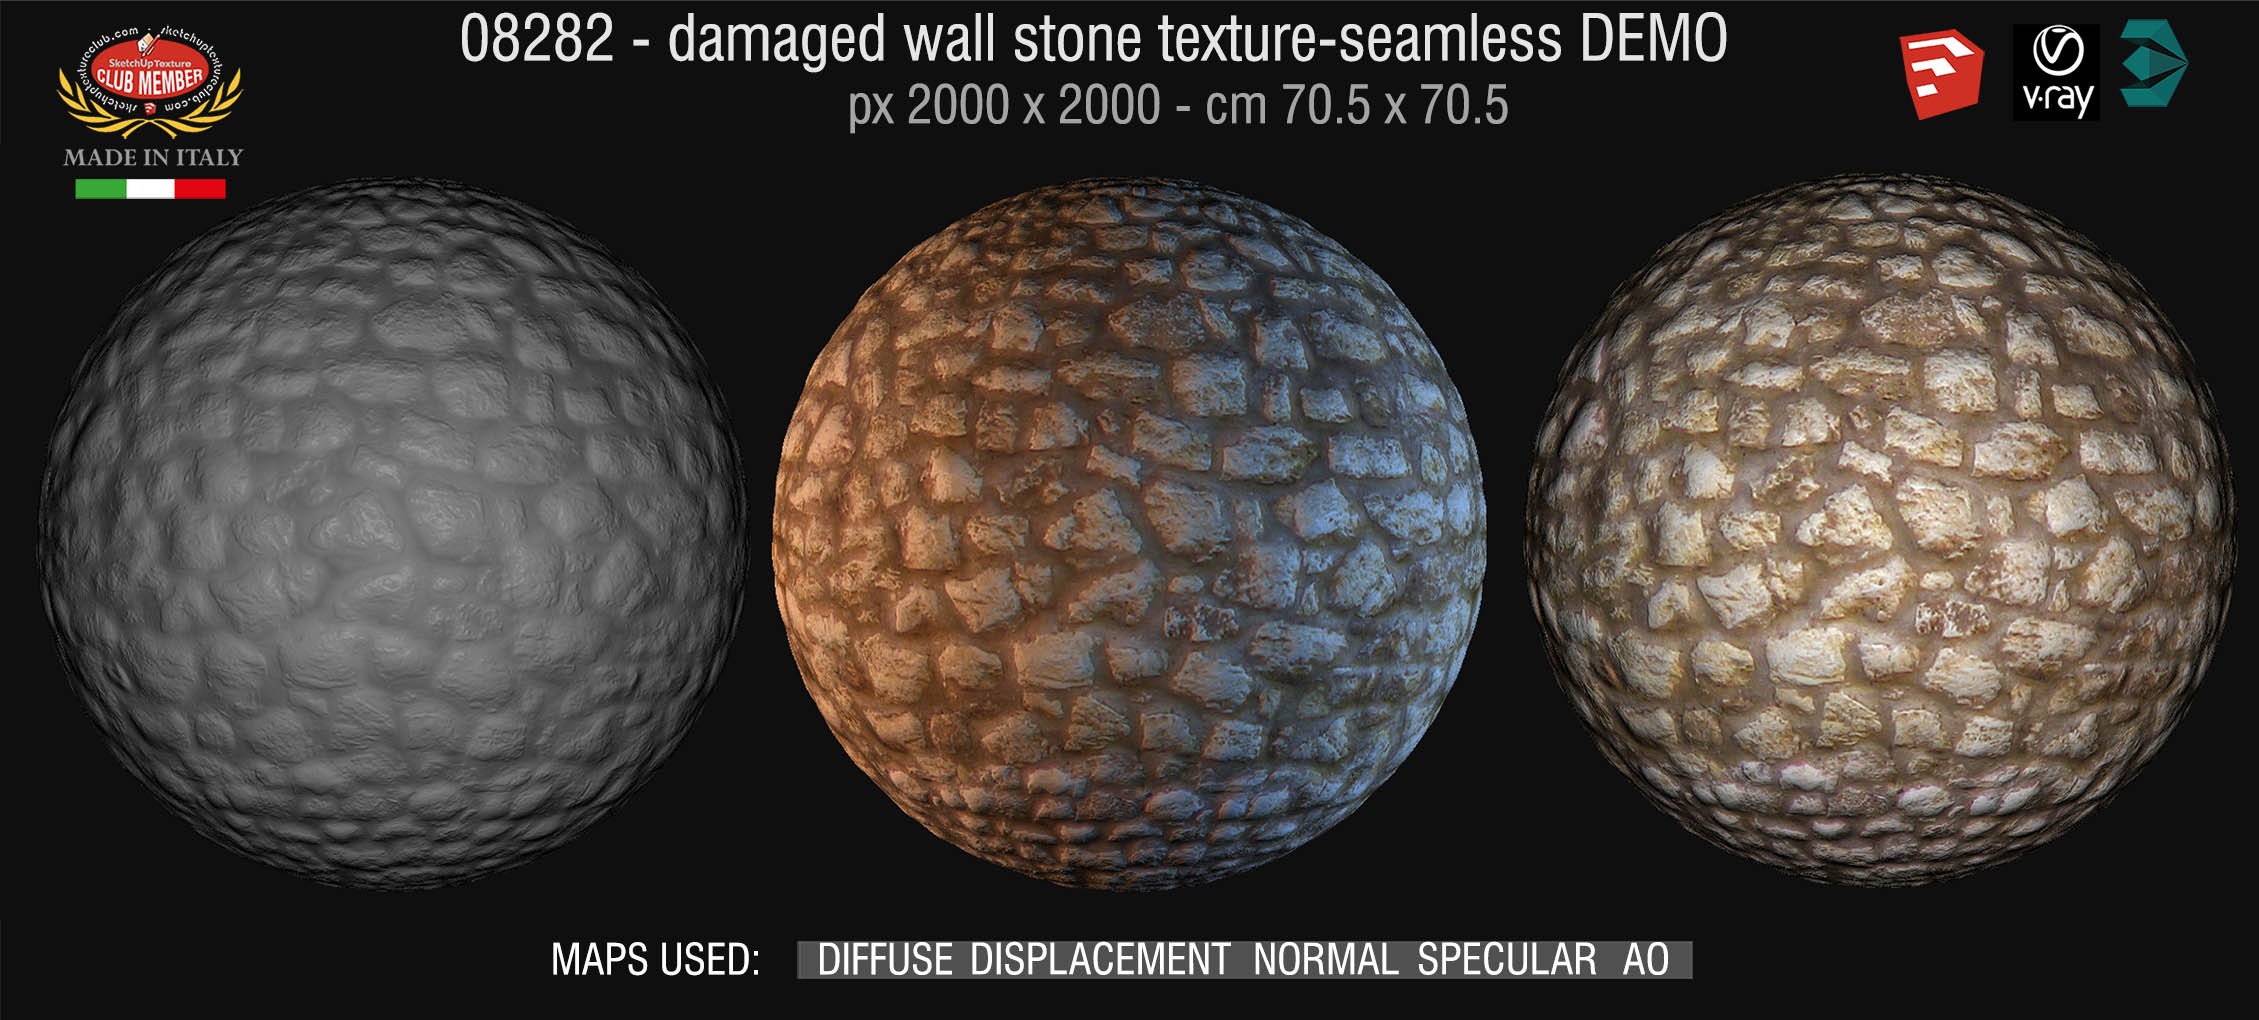 08282 HR Damaged wall stone texture + maps DEMO